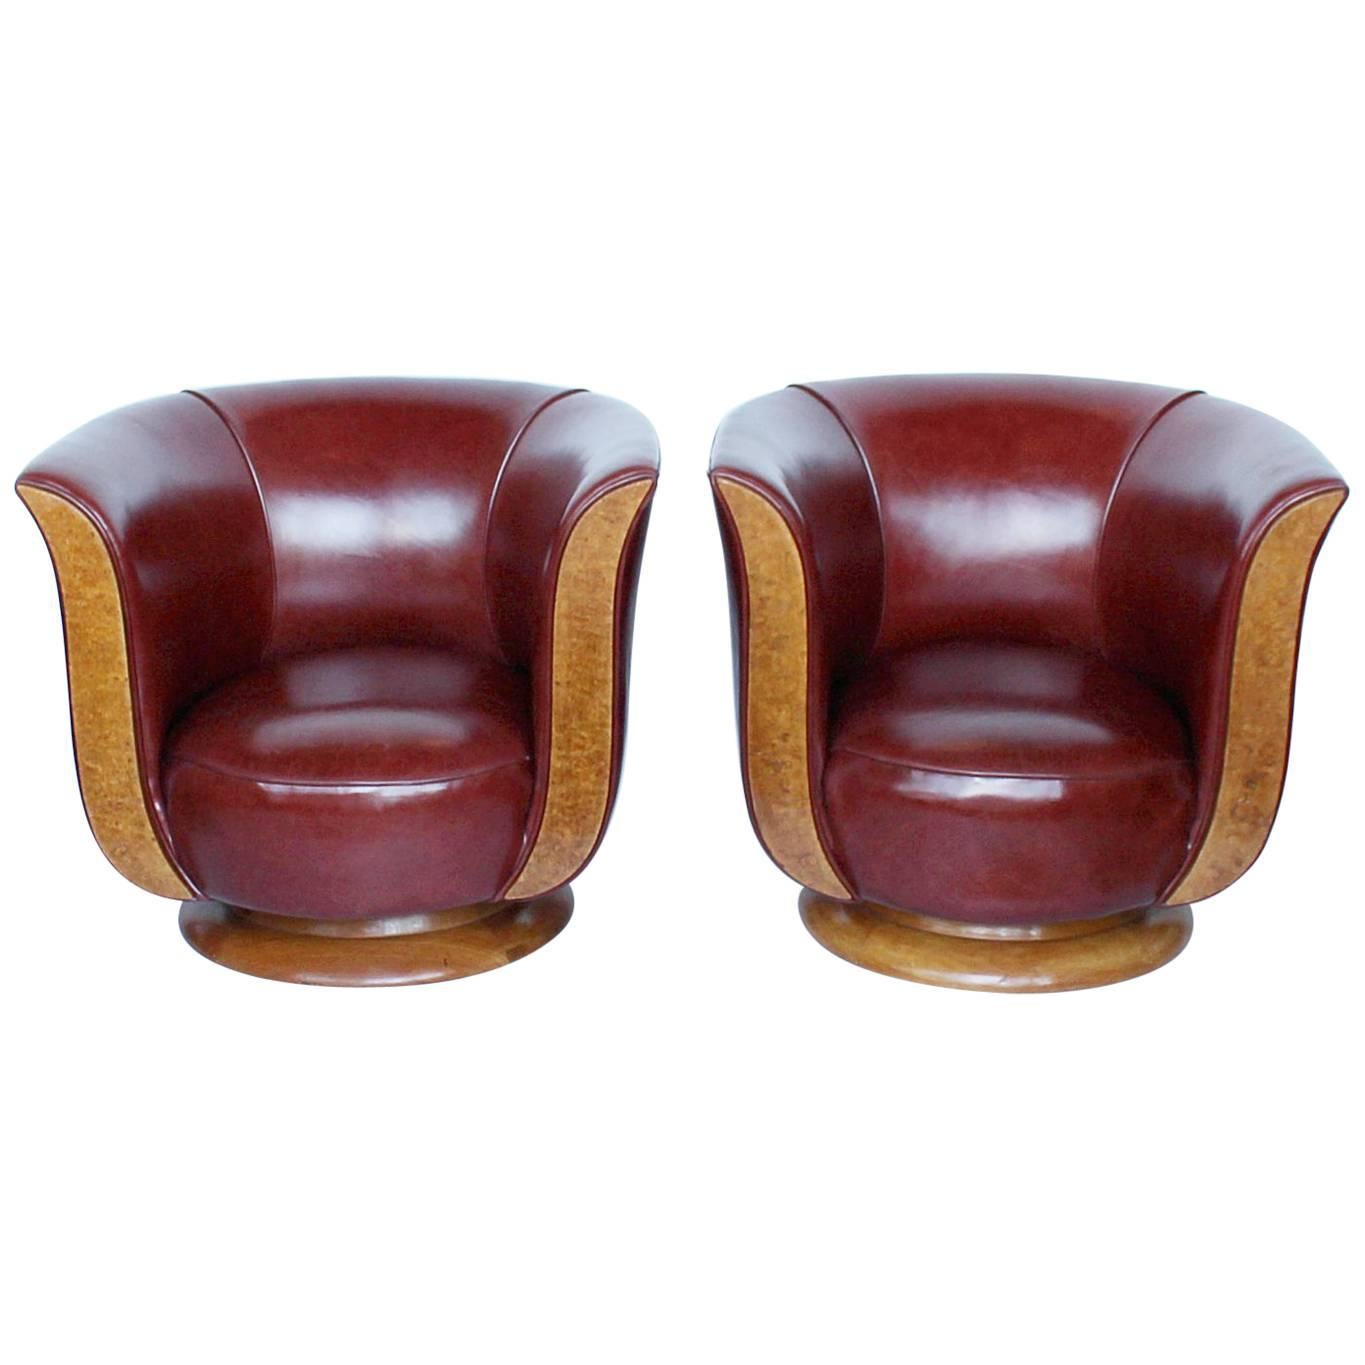 A Pair of Art Deco Tulip Chairs